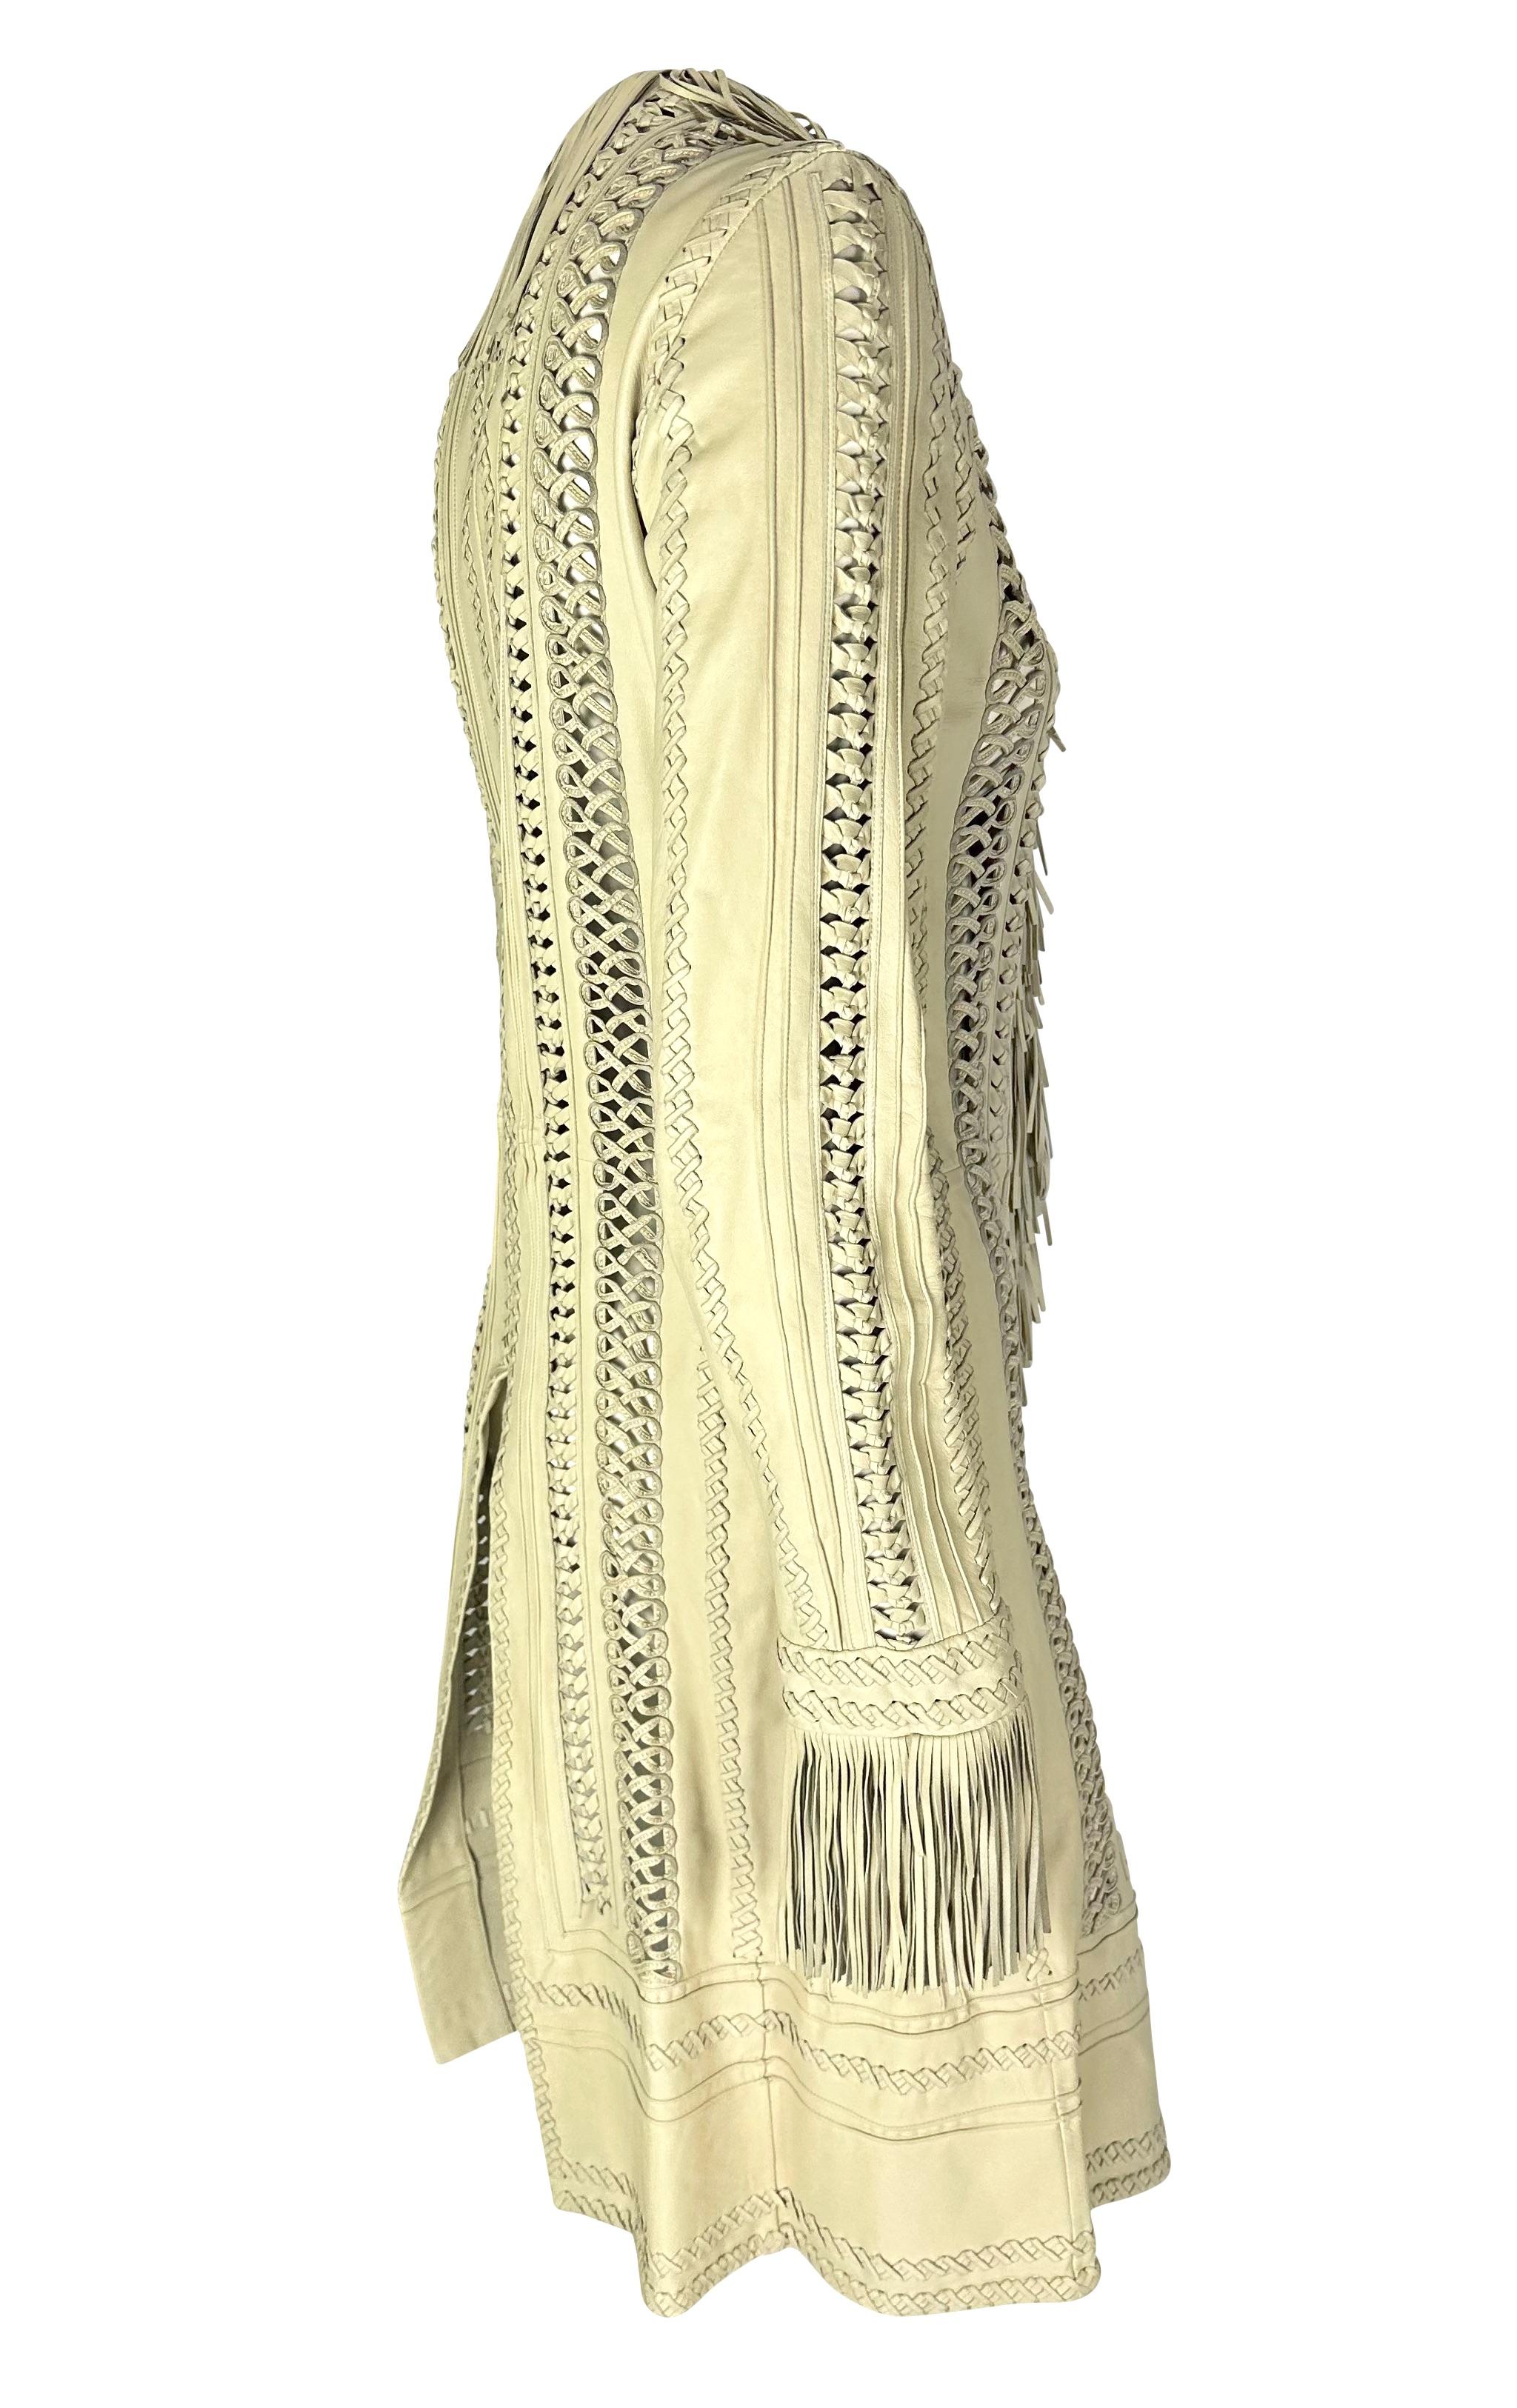 S/S 2002 Gianni Versace by Donatella Runway Fringe Panel Cream Leather Coat For Sale 5